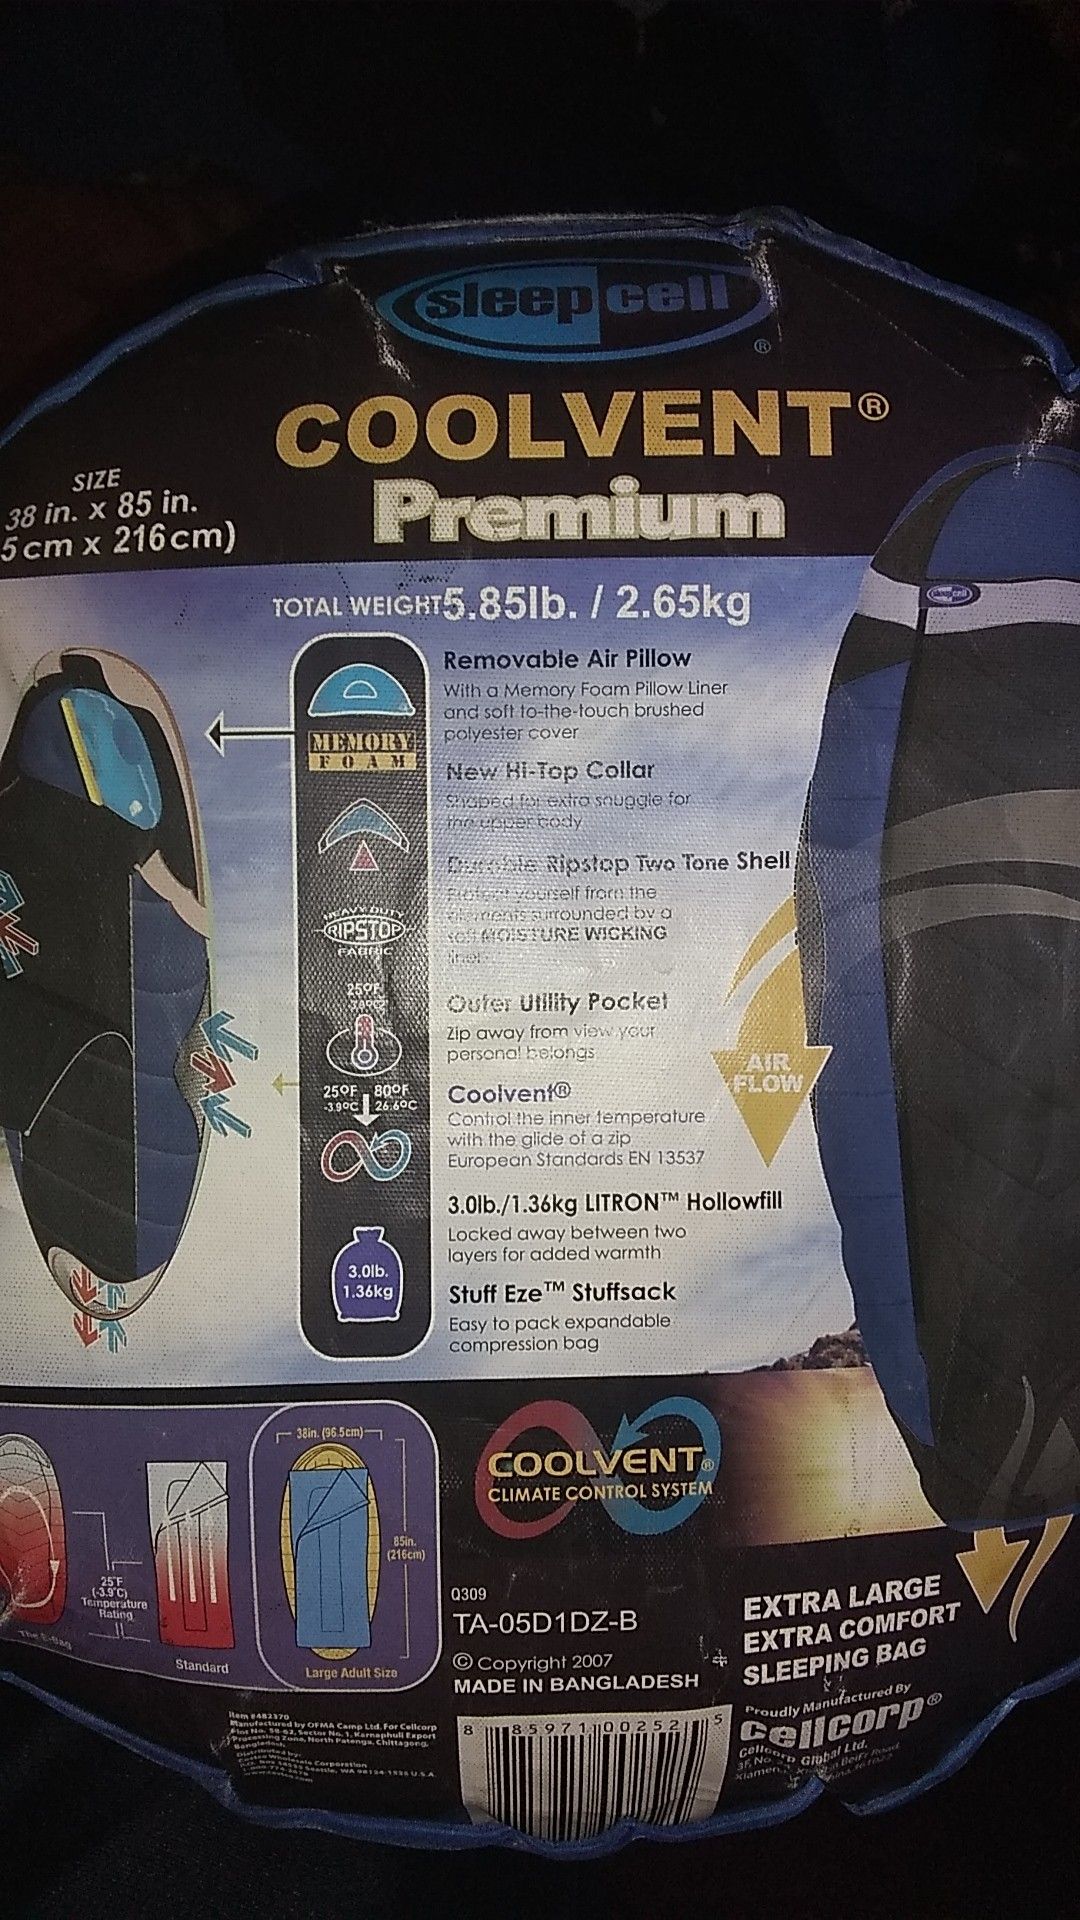 Sleep cell coolvent premium extra large extra comfort sleeping bag